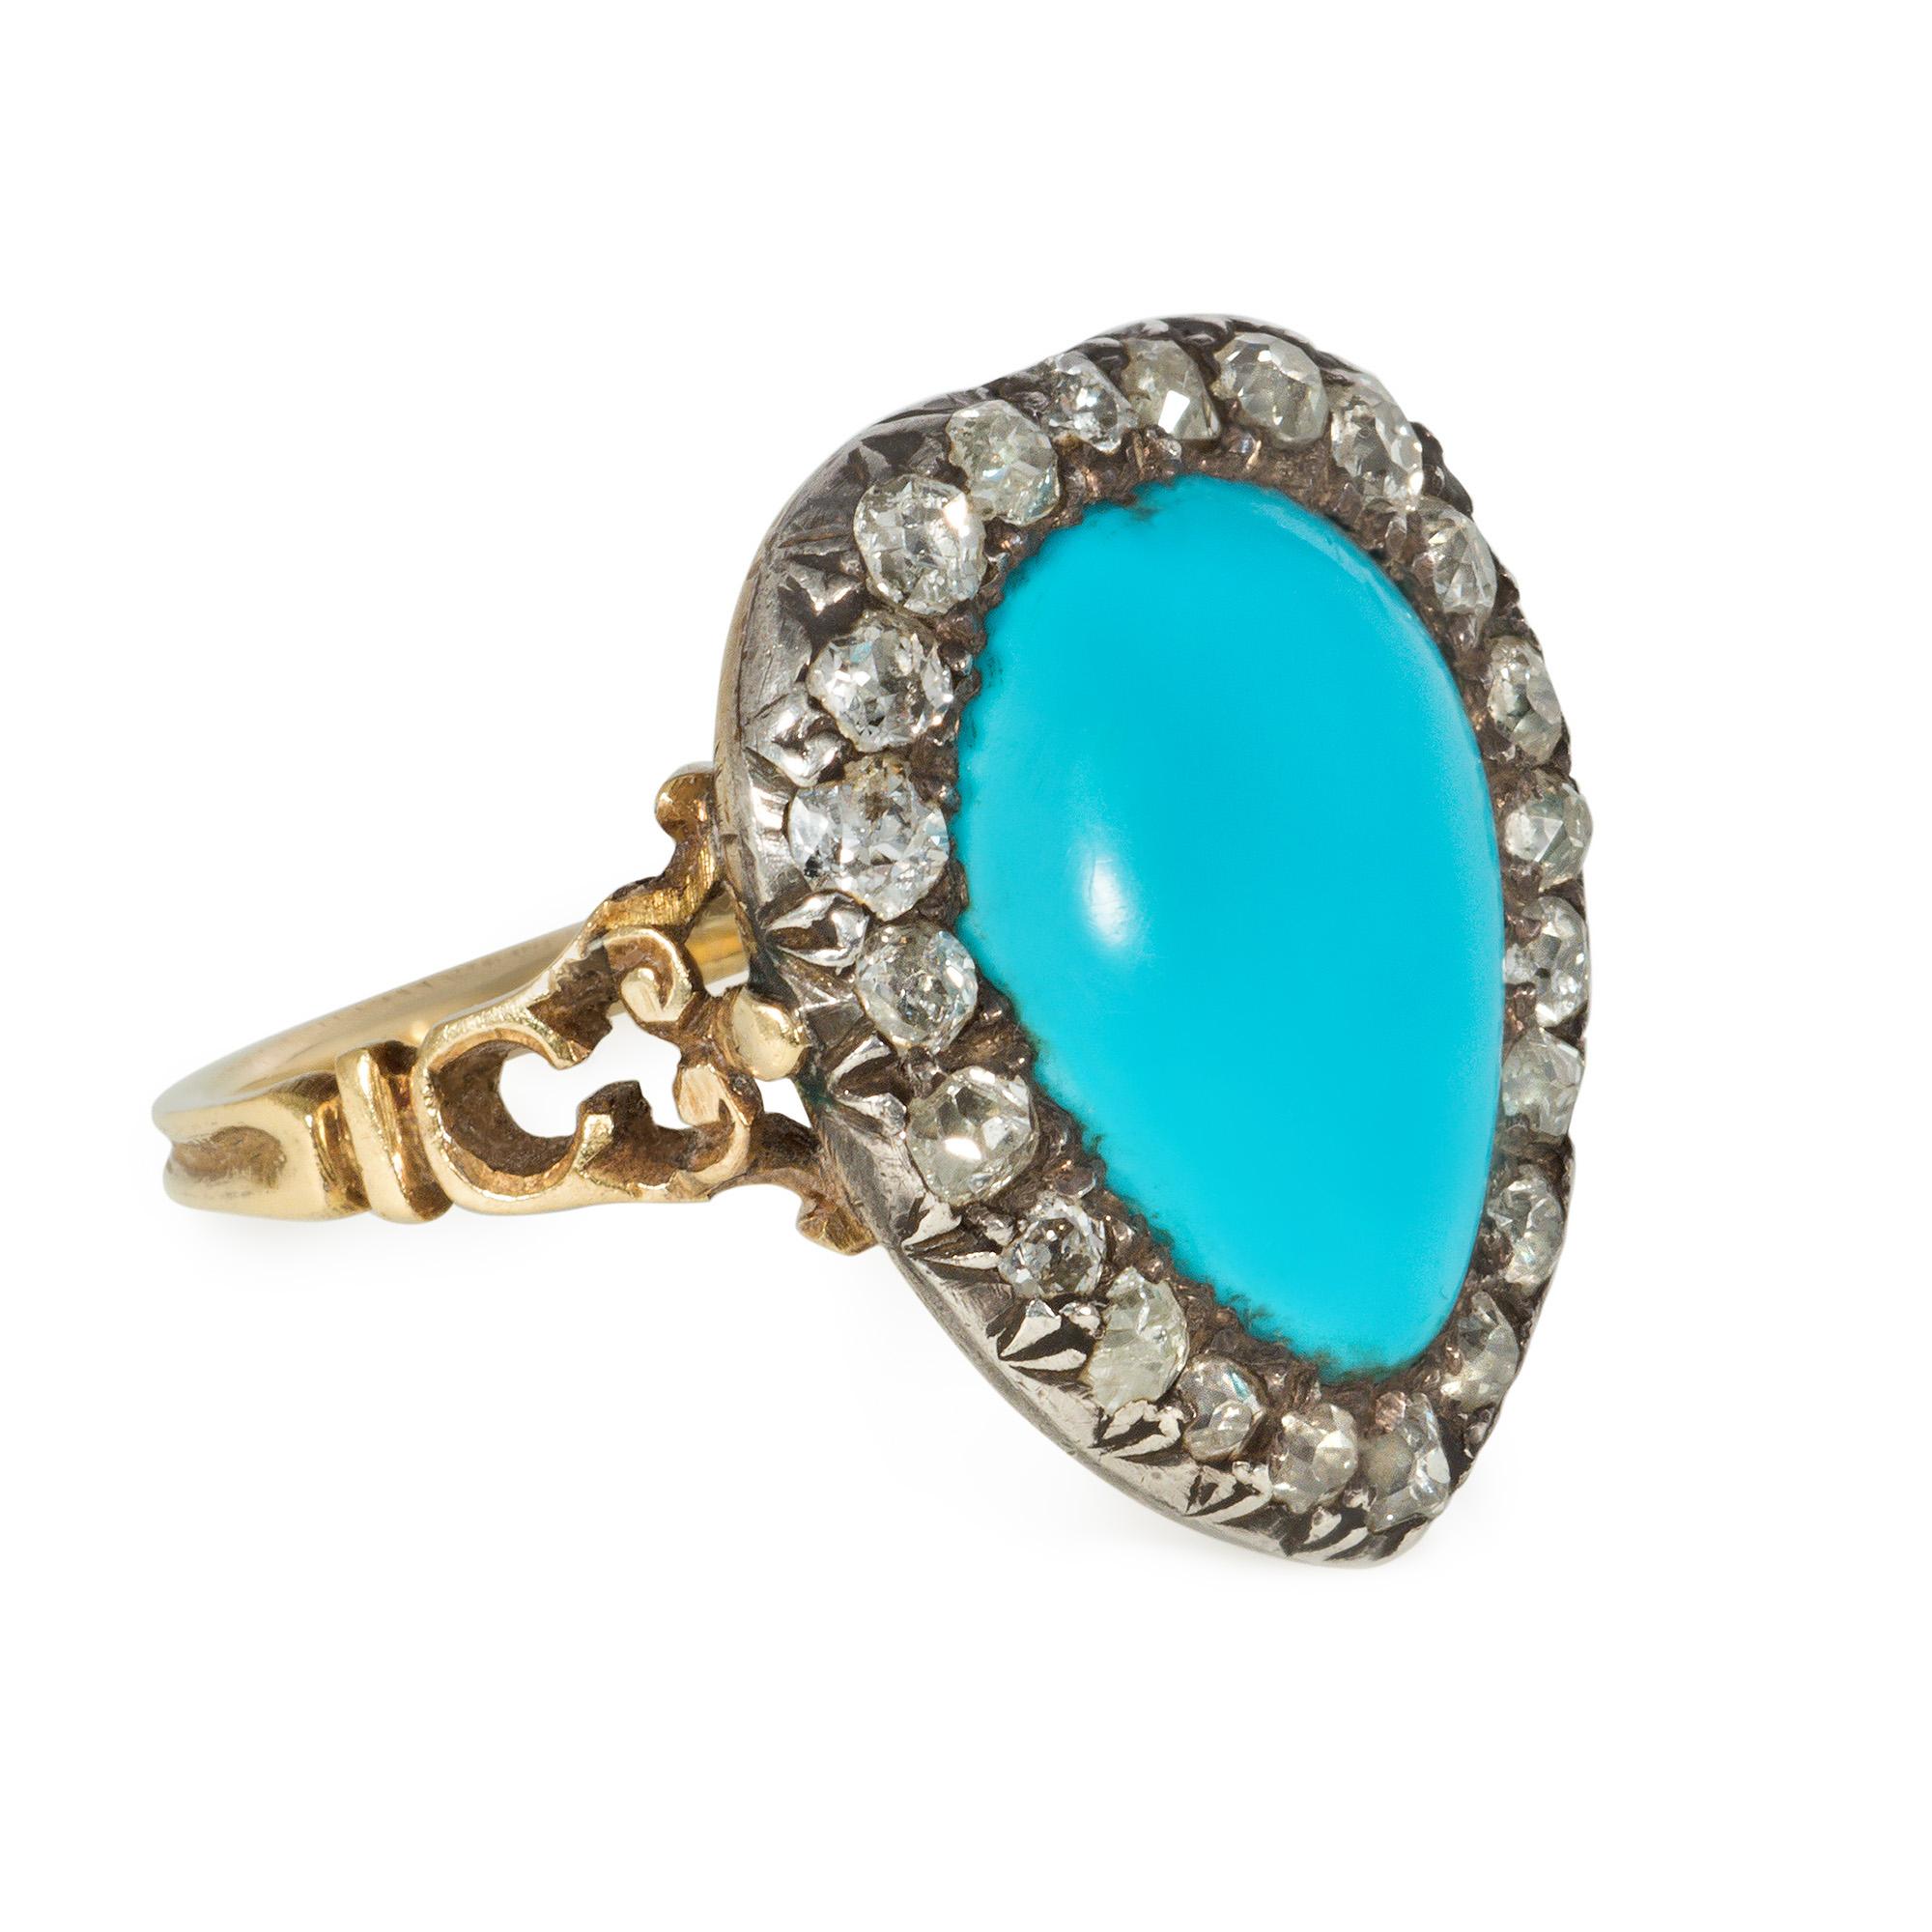 An antique Georgian era turquoise and diamond ring designed as a stylized heart comprised of a pear-shaped turquoise in an old-mine diamond surround with openwork shoulders, in silver and 18k gold.  Atw diamonds 1.00 ct.  Face-up: 2 cm x 1.8 cm

*